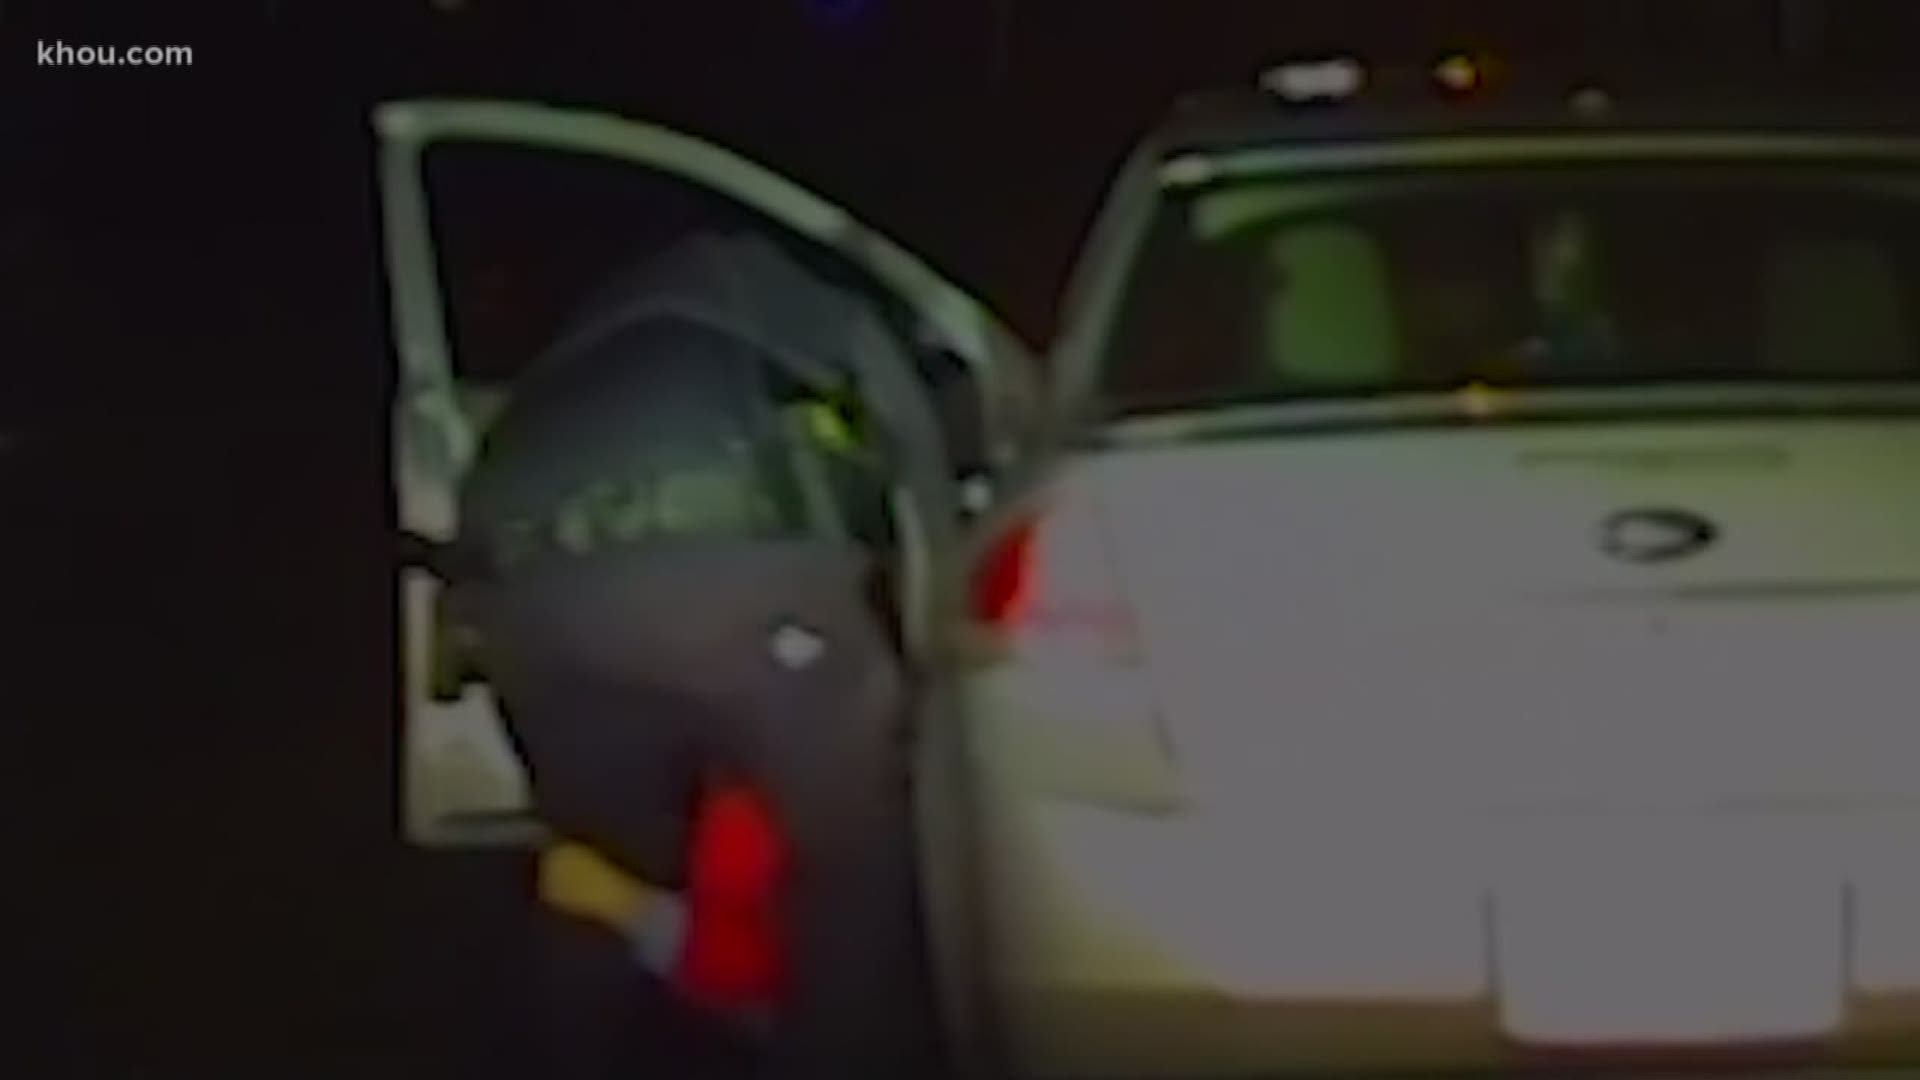 A dramatic and disturbing dashcam video shows a Richmond officer forcing a woman out of her car during a traffic stop over a broken tail light.